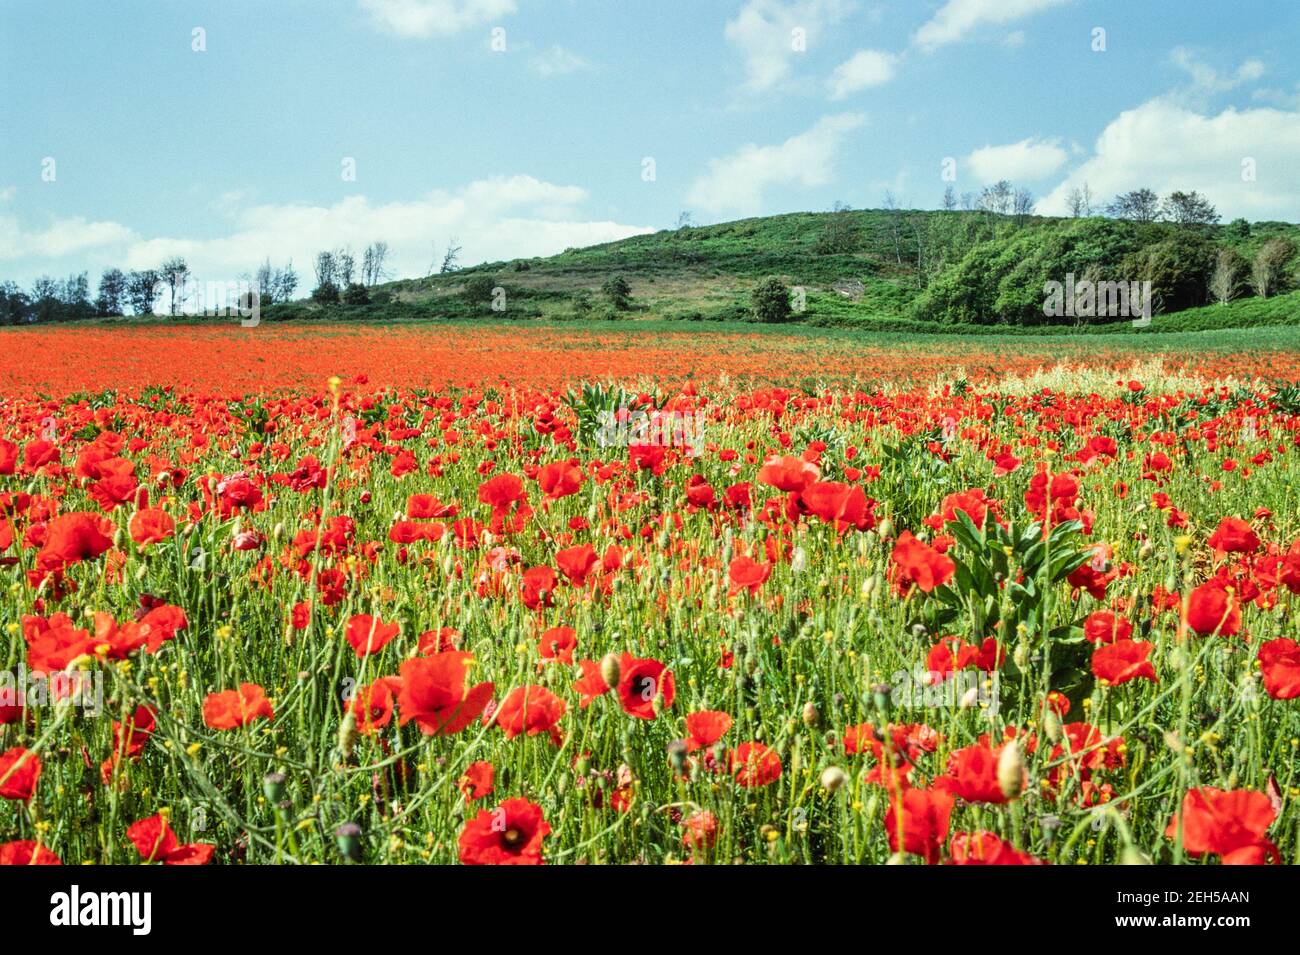 1993 England Lots of red poppies in a field England UK GB Europe. Papaver rhoeas (common names include common poppy, corn poppy, corn rose, field poppy, Flanders poppy, or red poppy) is an annual herbaceous species of flowering plant in the poppy family, Papaveraceae. This poppy is notable as an agricultural weed (hence the common names including 'corn' and 'field') and after World War I as a symbol of dead soldiers. Before the advent of herbicides, P. rhoeas sometimes was abundant in agricultural fields. Stock Photo